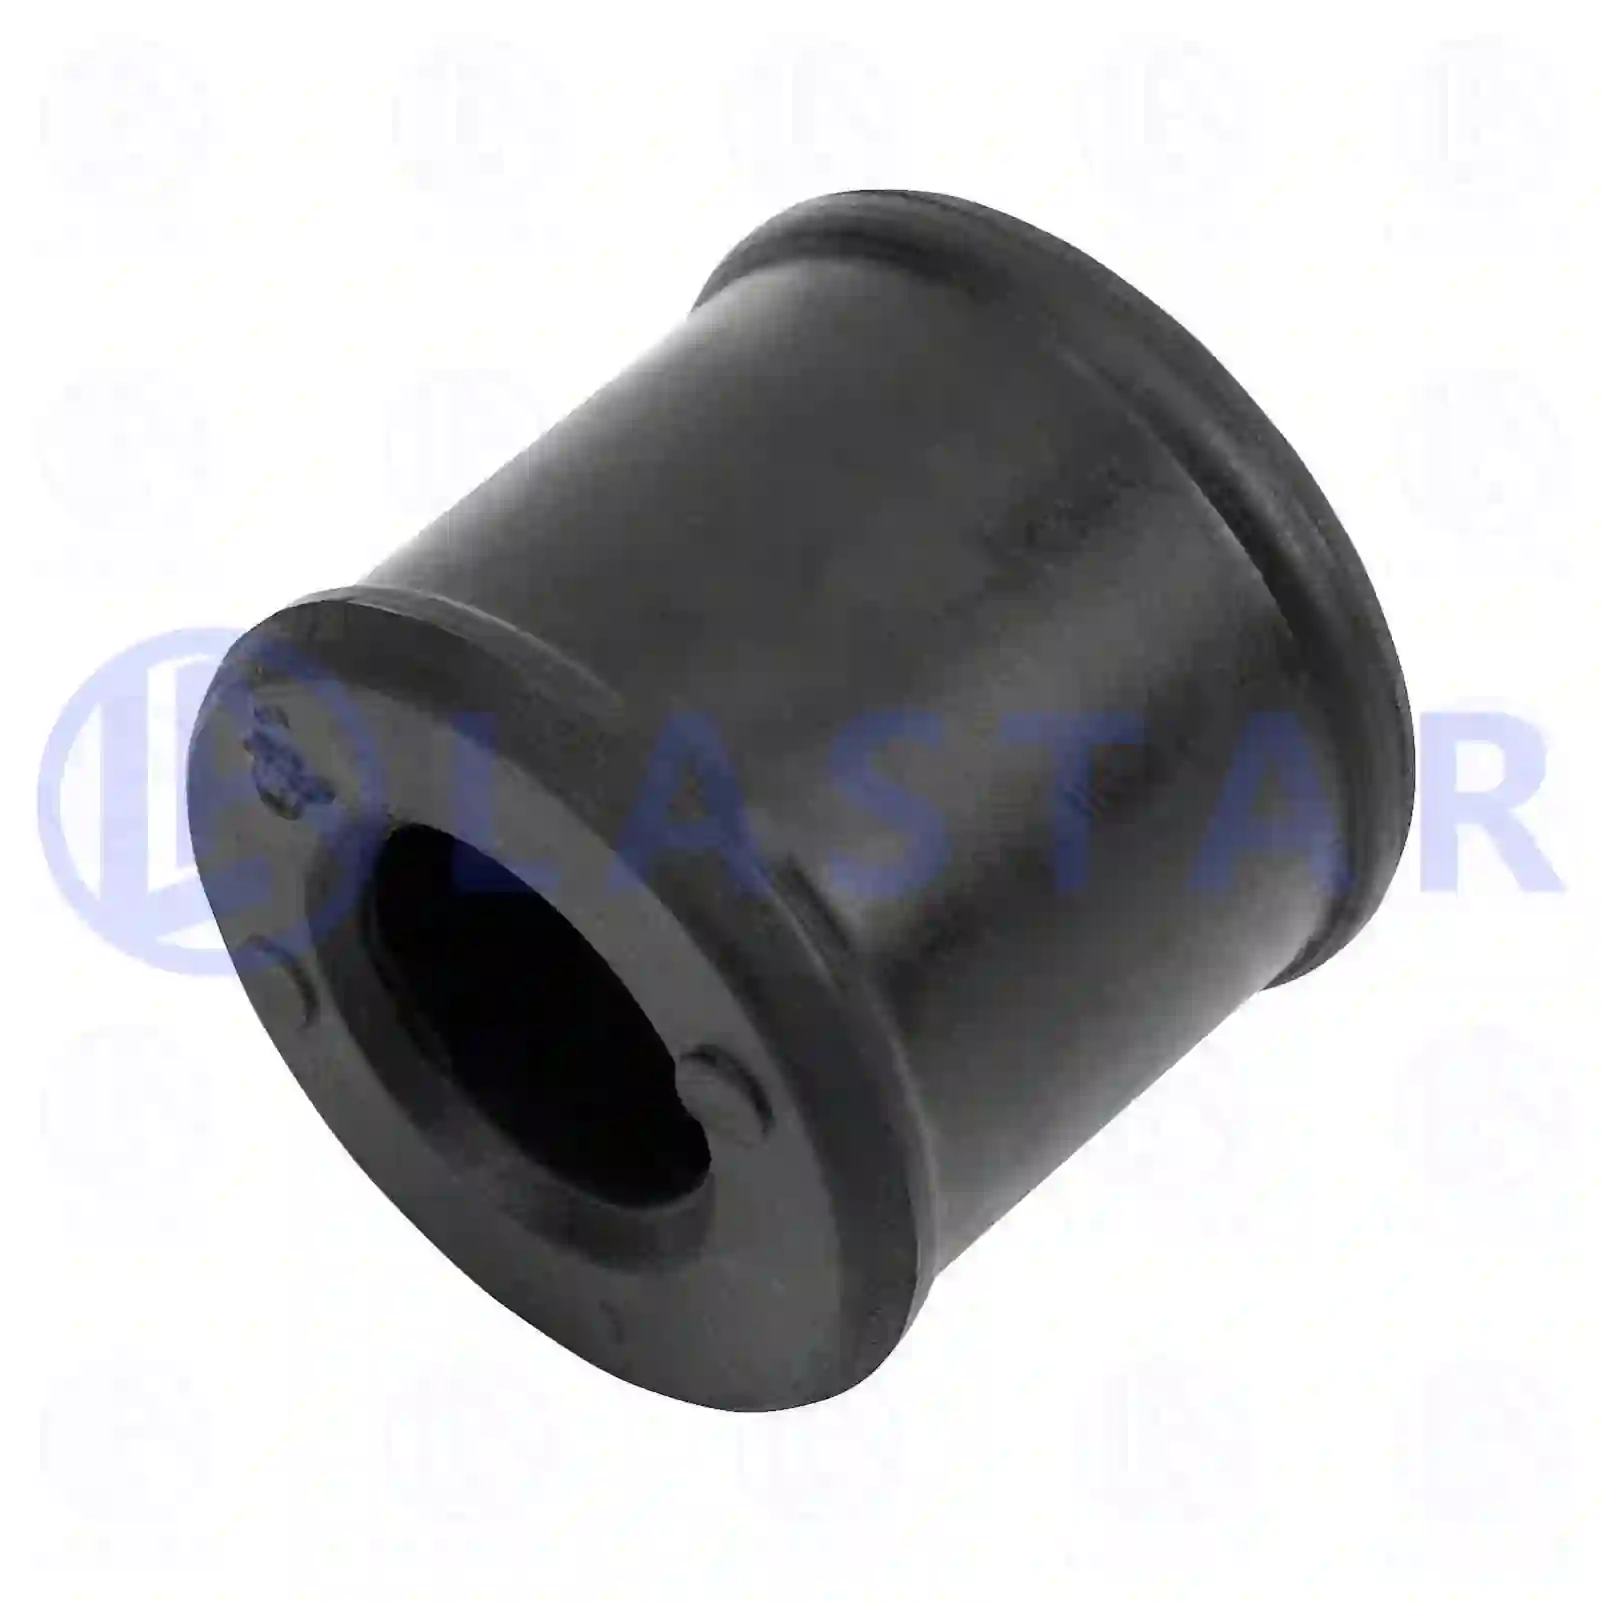 Rubber bushing, shock absorber, 77728136, 93163099, 88437040002, 0003232444, 0003232885, ZG41474-0008 ||  77728136 Lastar Spare Part | Truck Spare Parts, Auotomotive Spare Parts Rubber bushing, shock absorber, 77728136, 93163099, 88437040002, 0003232444, 0003232885, ZG41474-0008 ||  77728136 Lastar Spare Part | Truck Spare Parts, Auotomotive Spare Parts